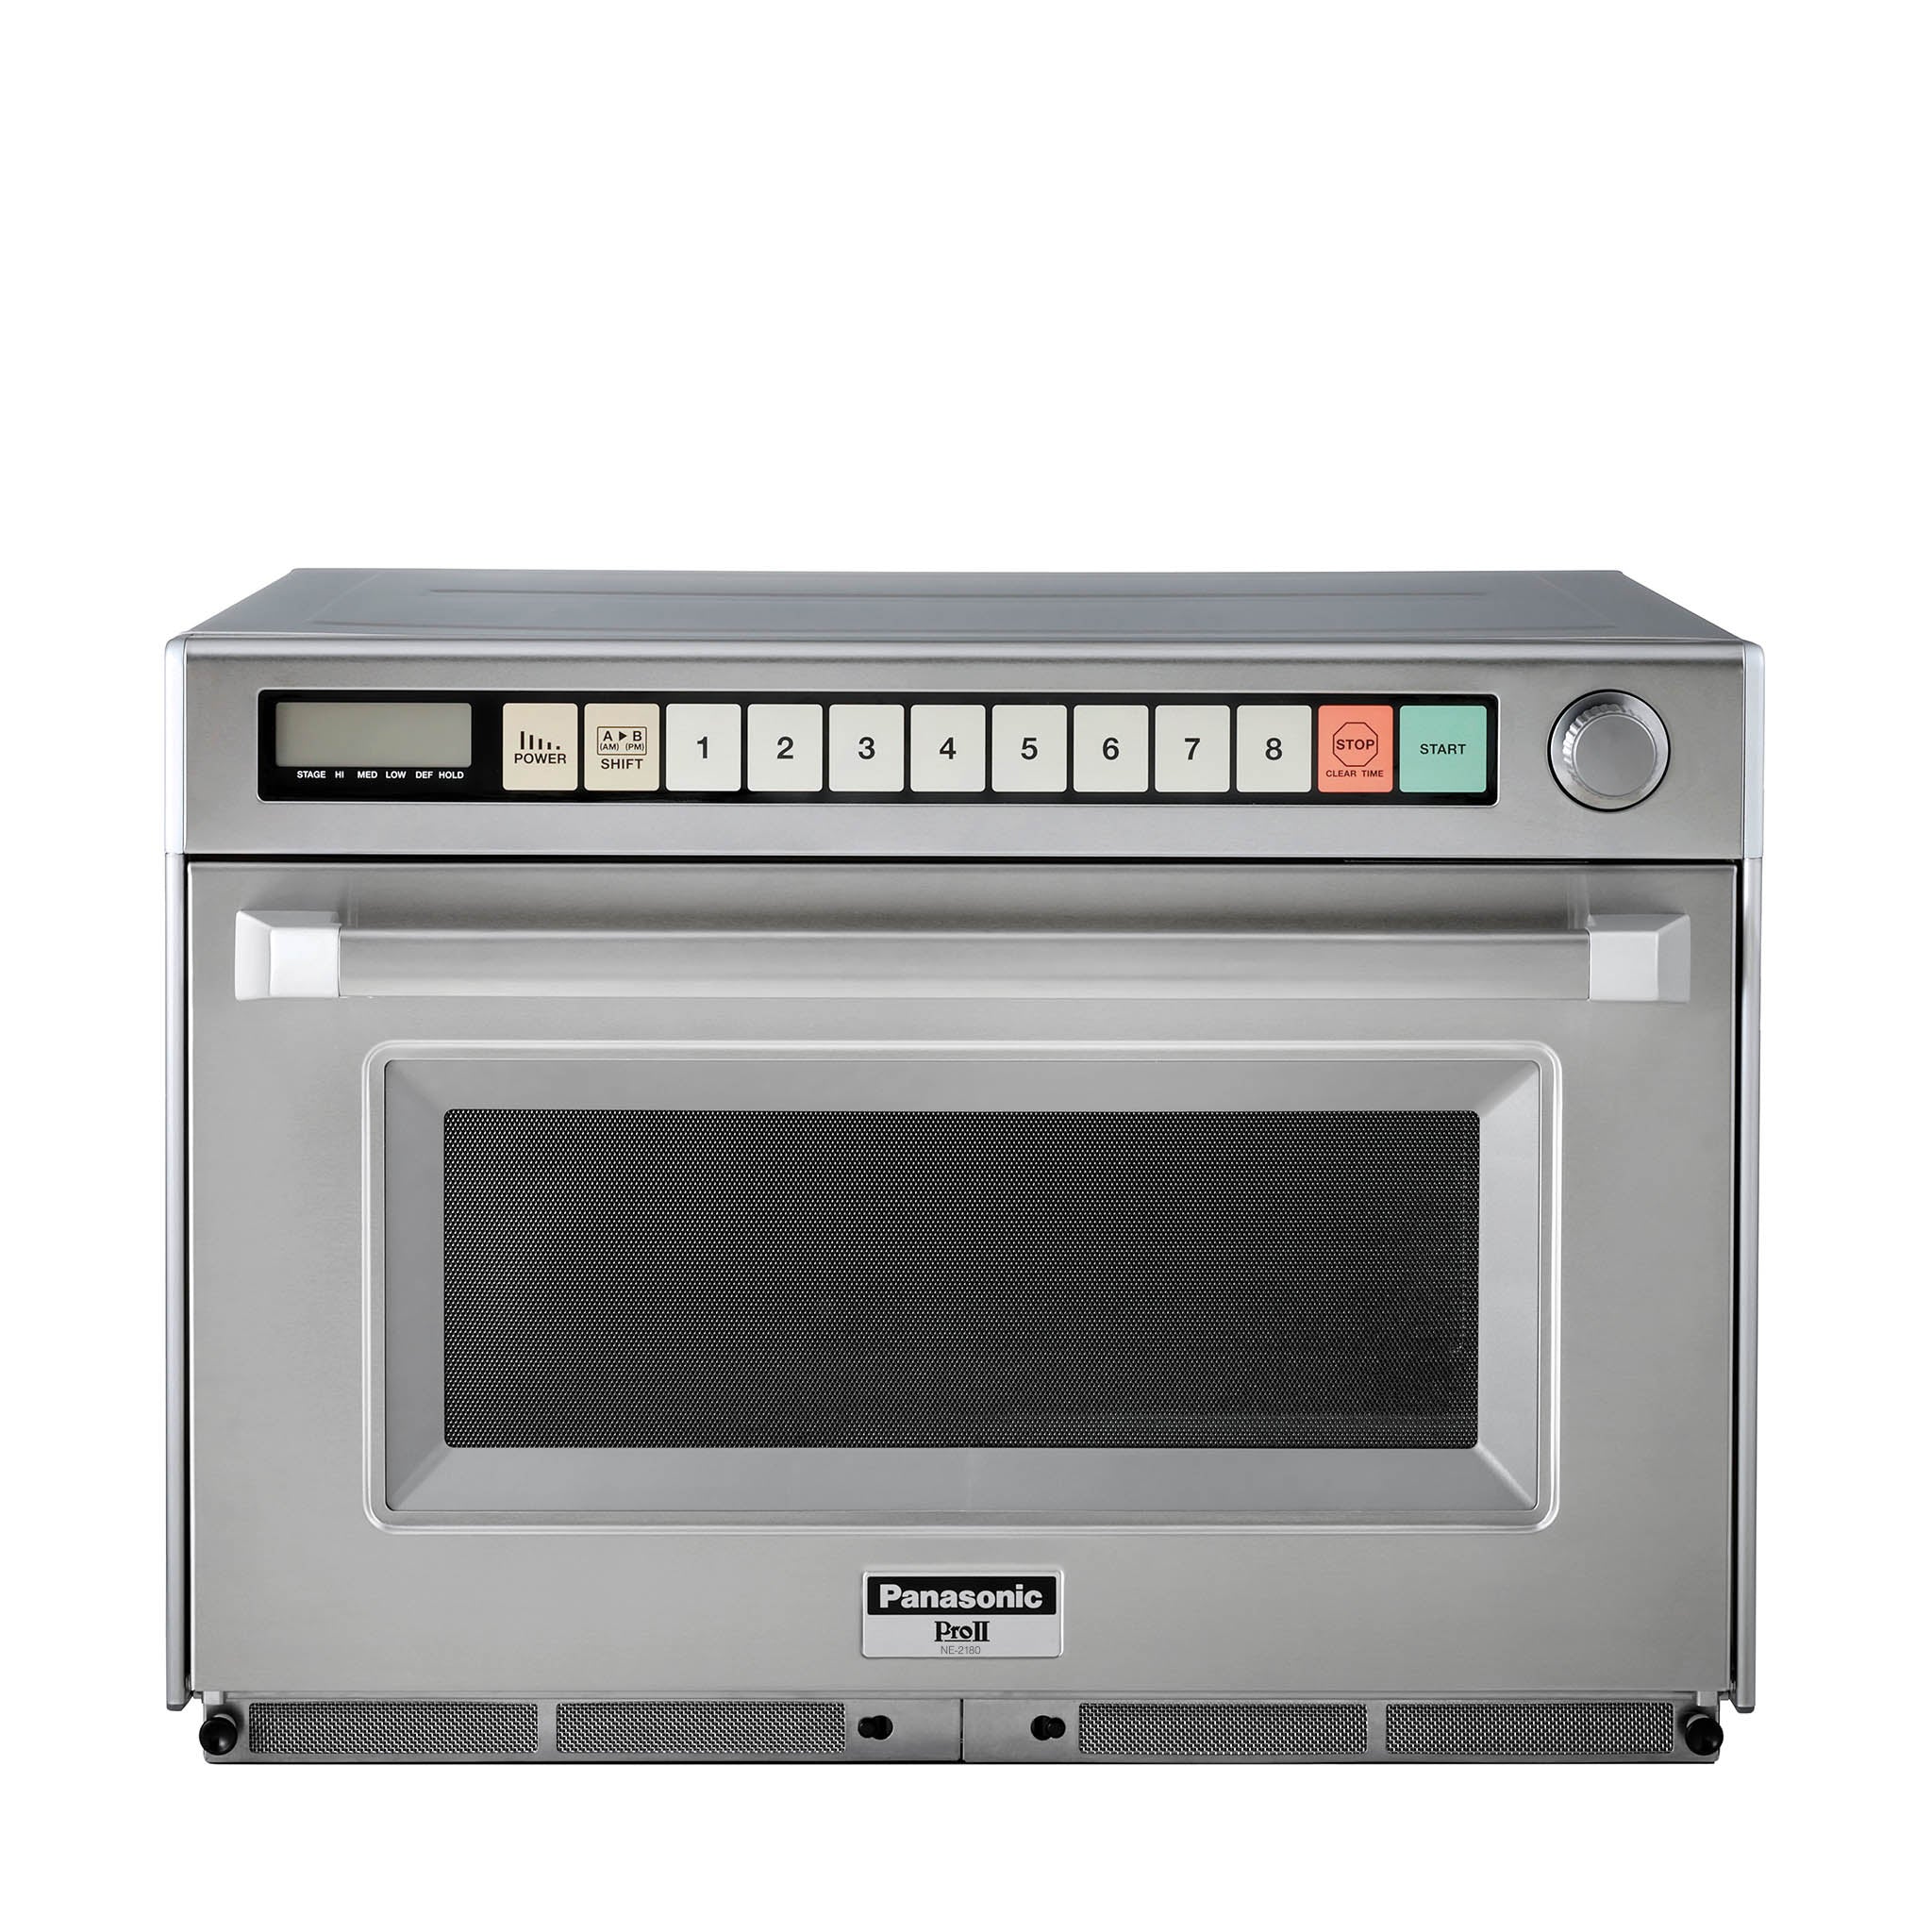 Combi Ovens for Banqueting Part One: What to consider?